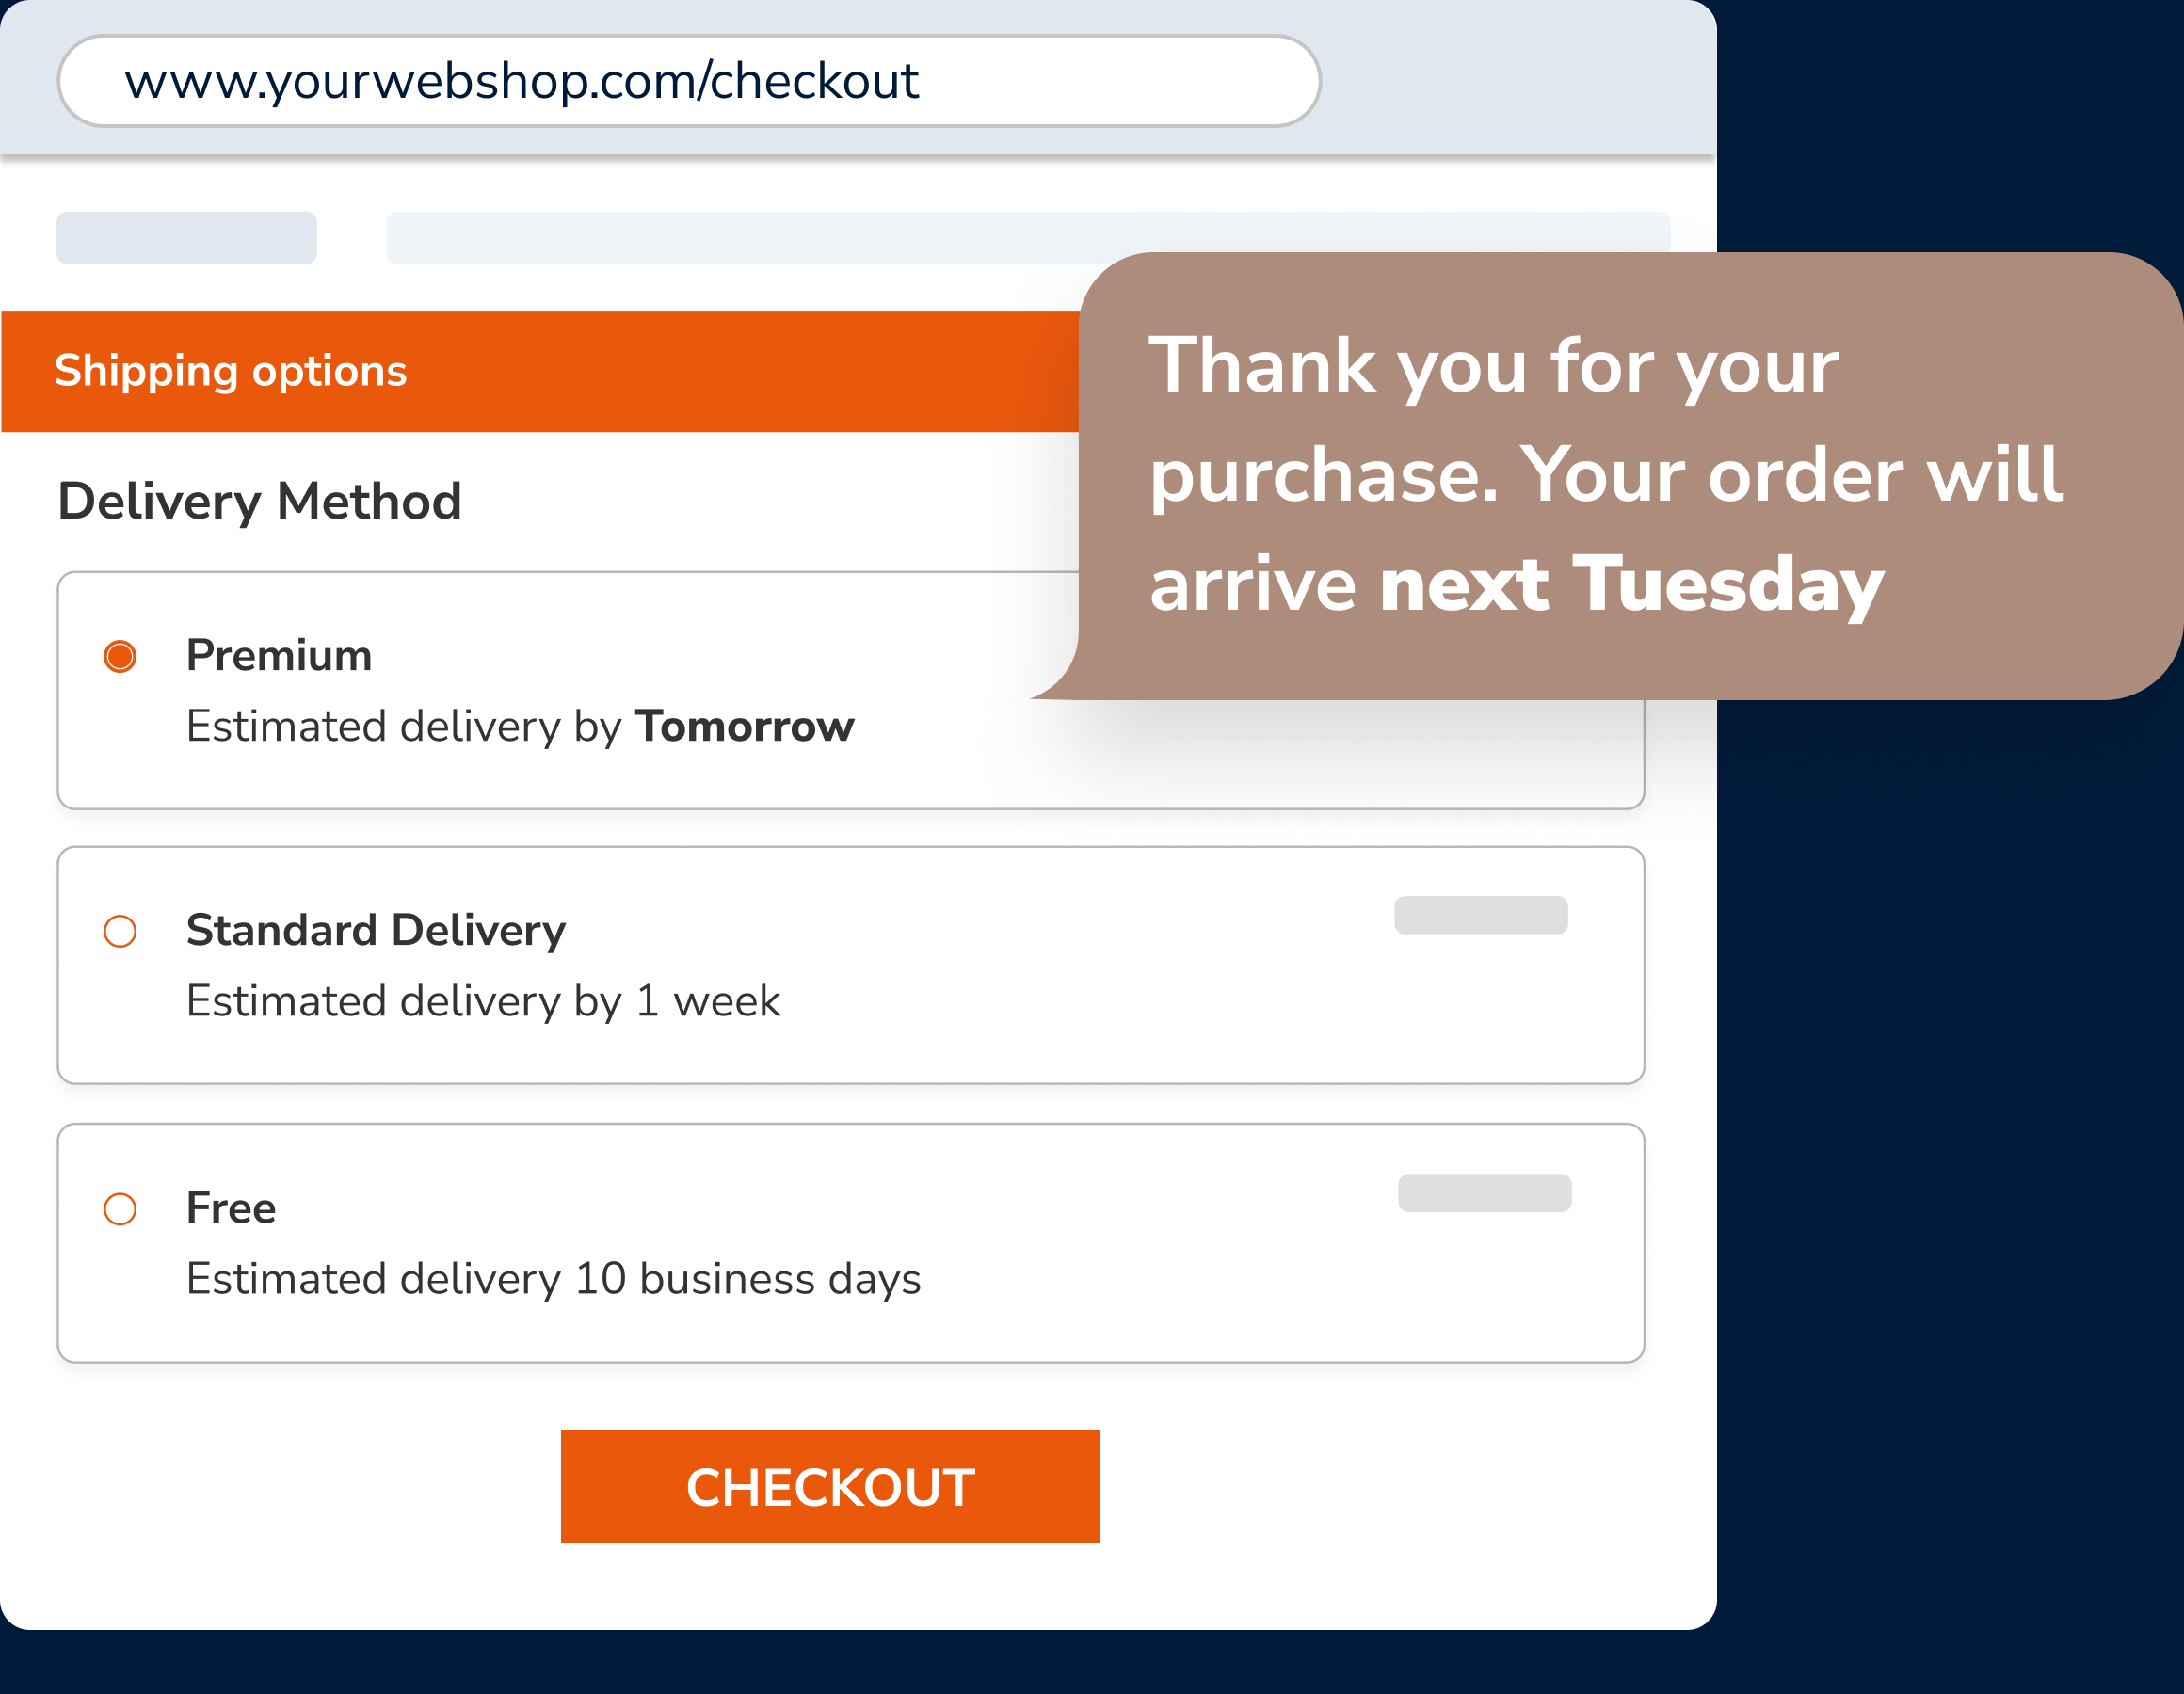 Parcel Perform platform showing three shipping options - Premium, Standard Delivery, and Free.